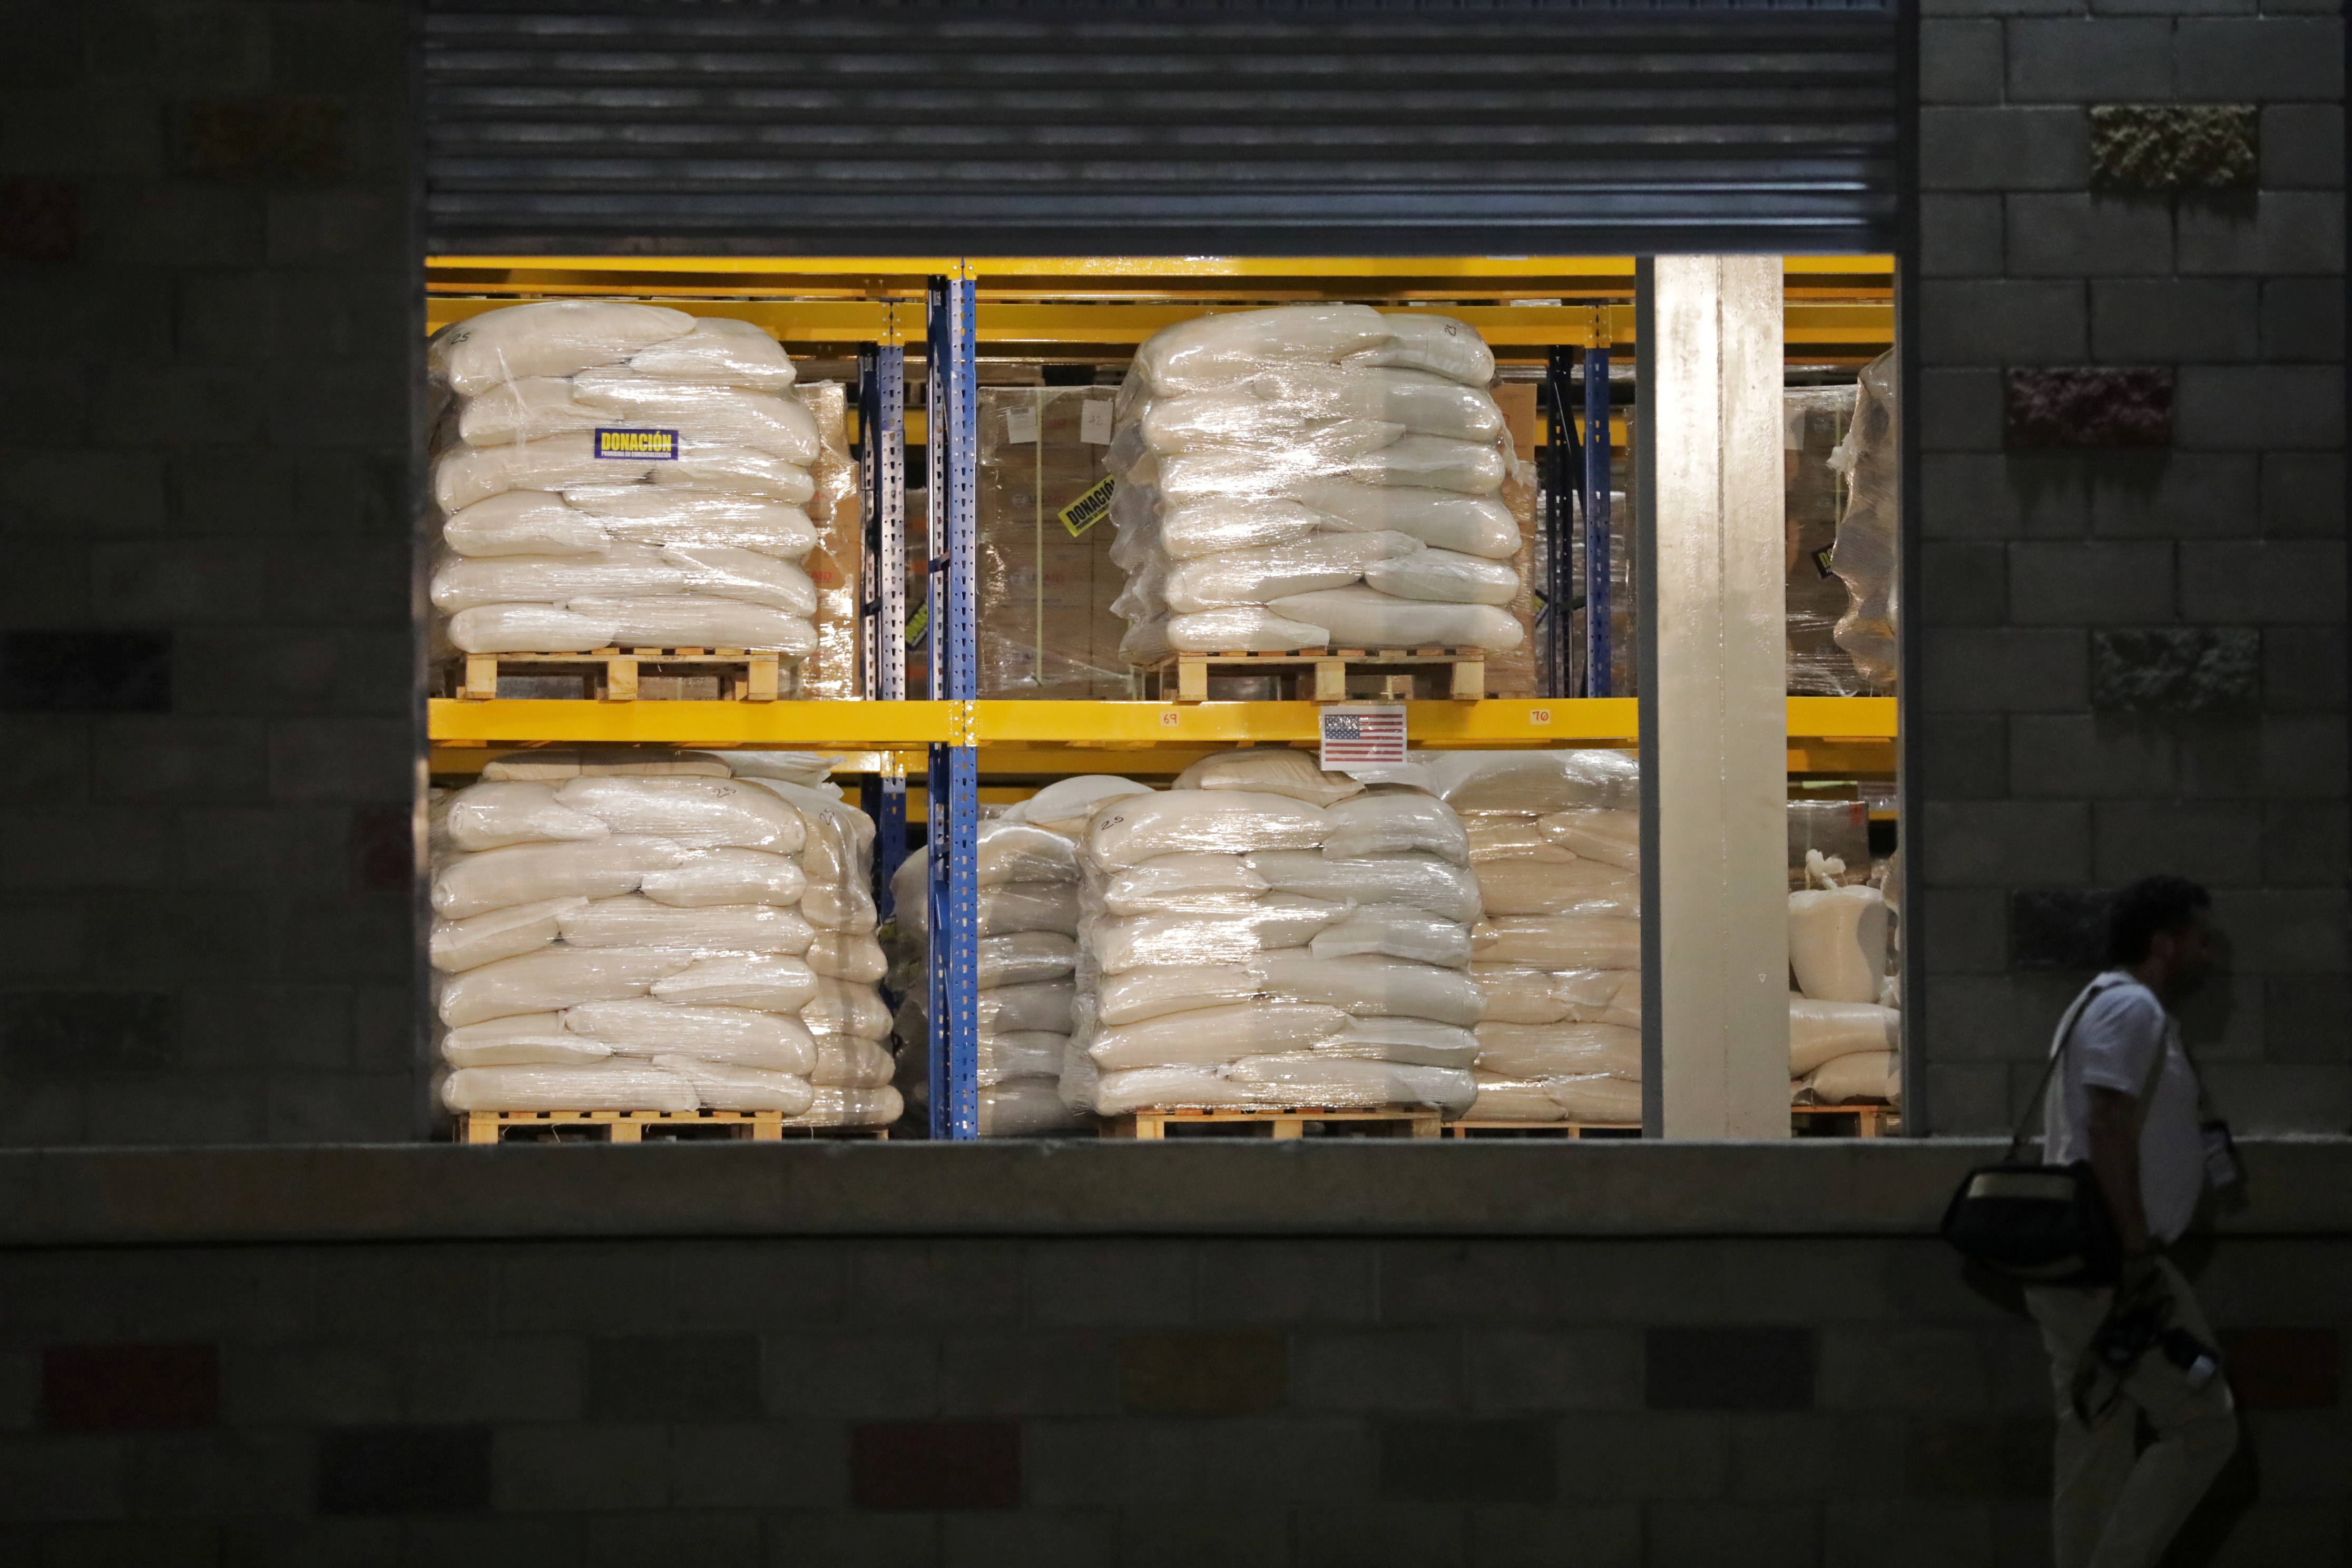 A man walks past aid at a warehouse where international humanitarian aid for Venezuela is being stored, during a visit by U.S. Secretary of State Mike Pompeo and Colombia’s President Ivan Duque, in Cucuta